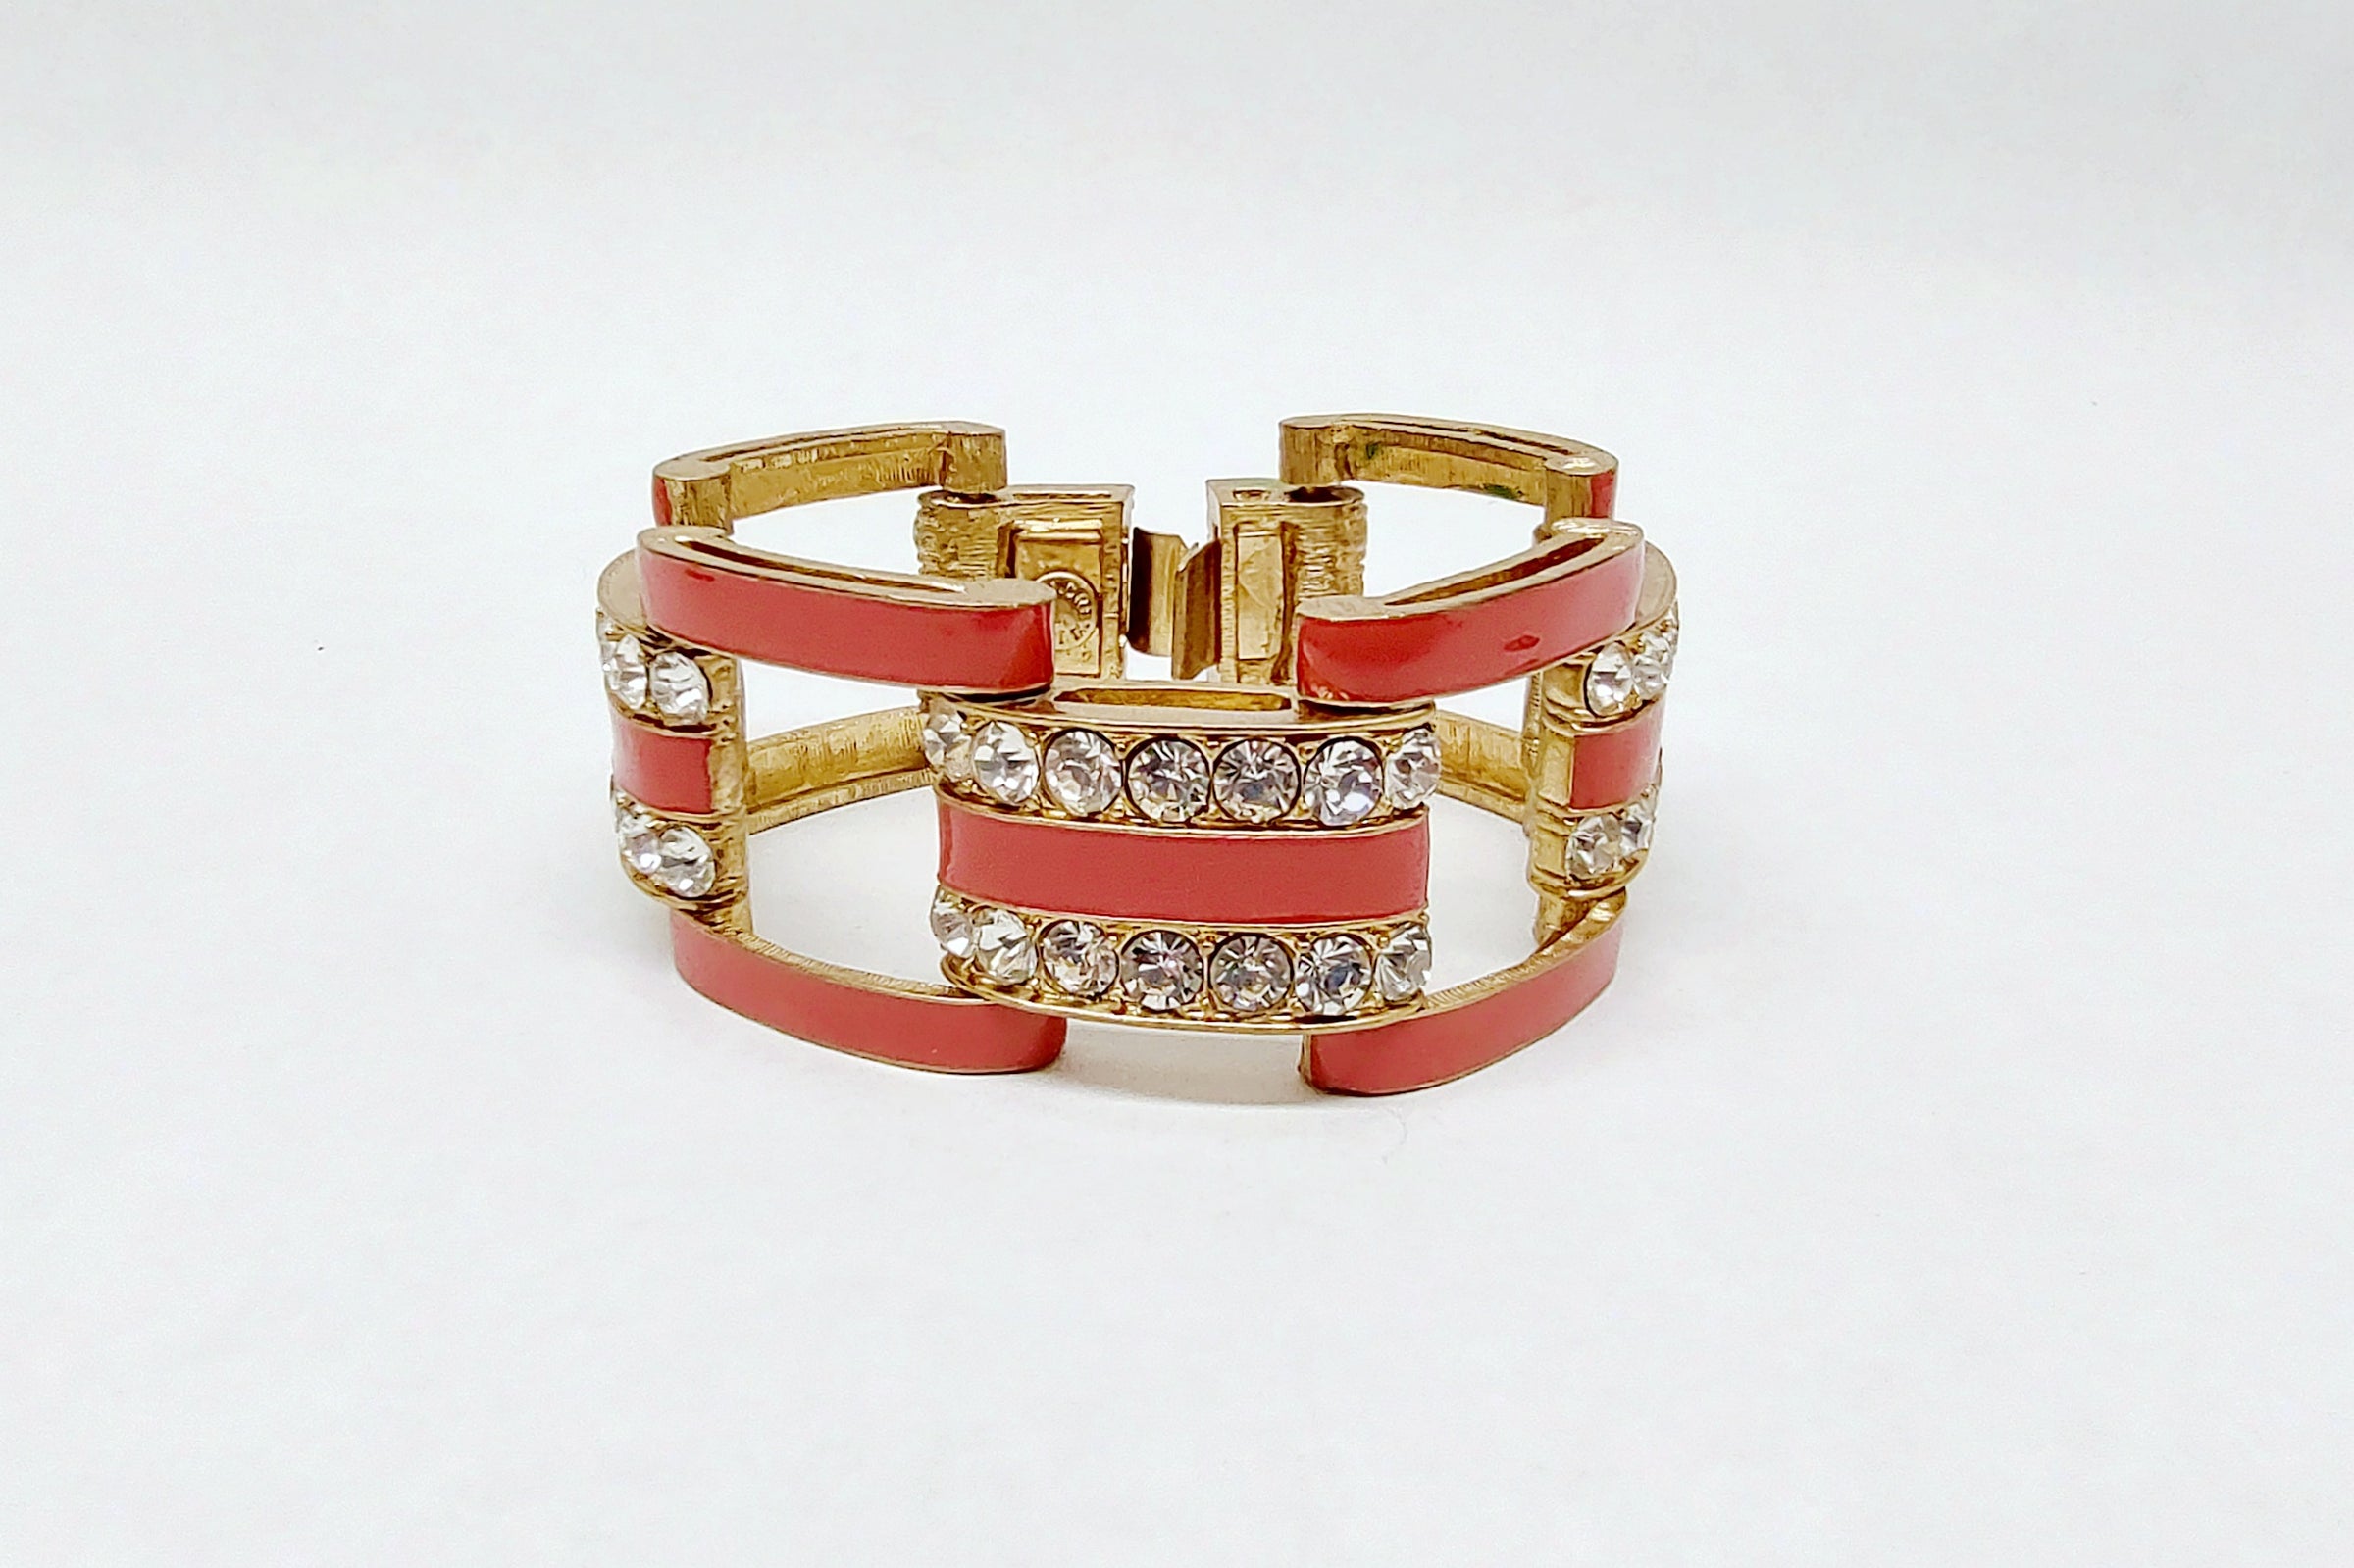 Vintage J Crew Chunky Gold Tone Link Bracelet with Rhinestones - Hers and His Treasures